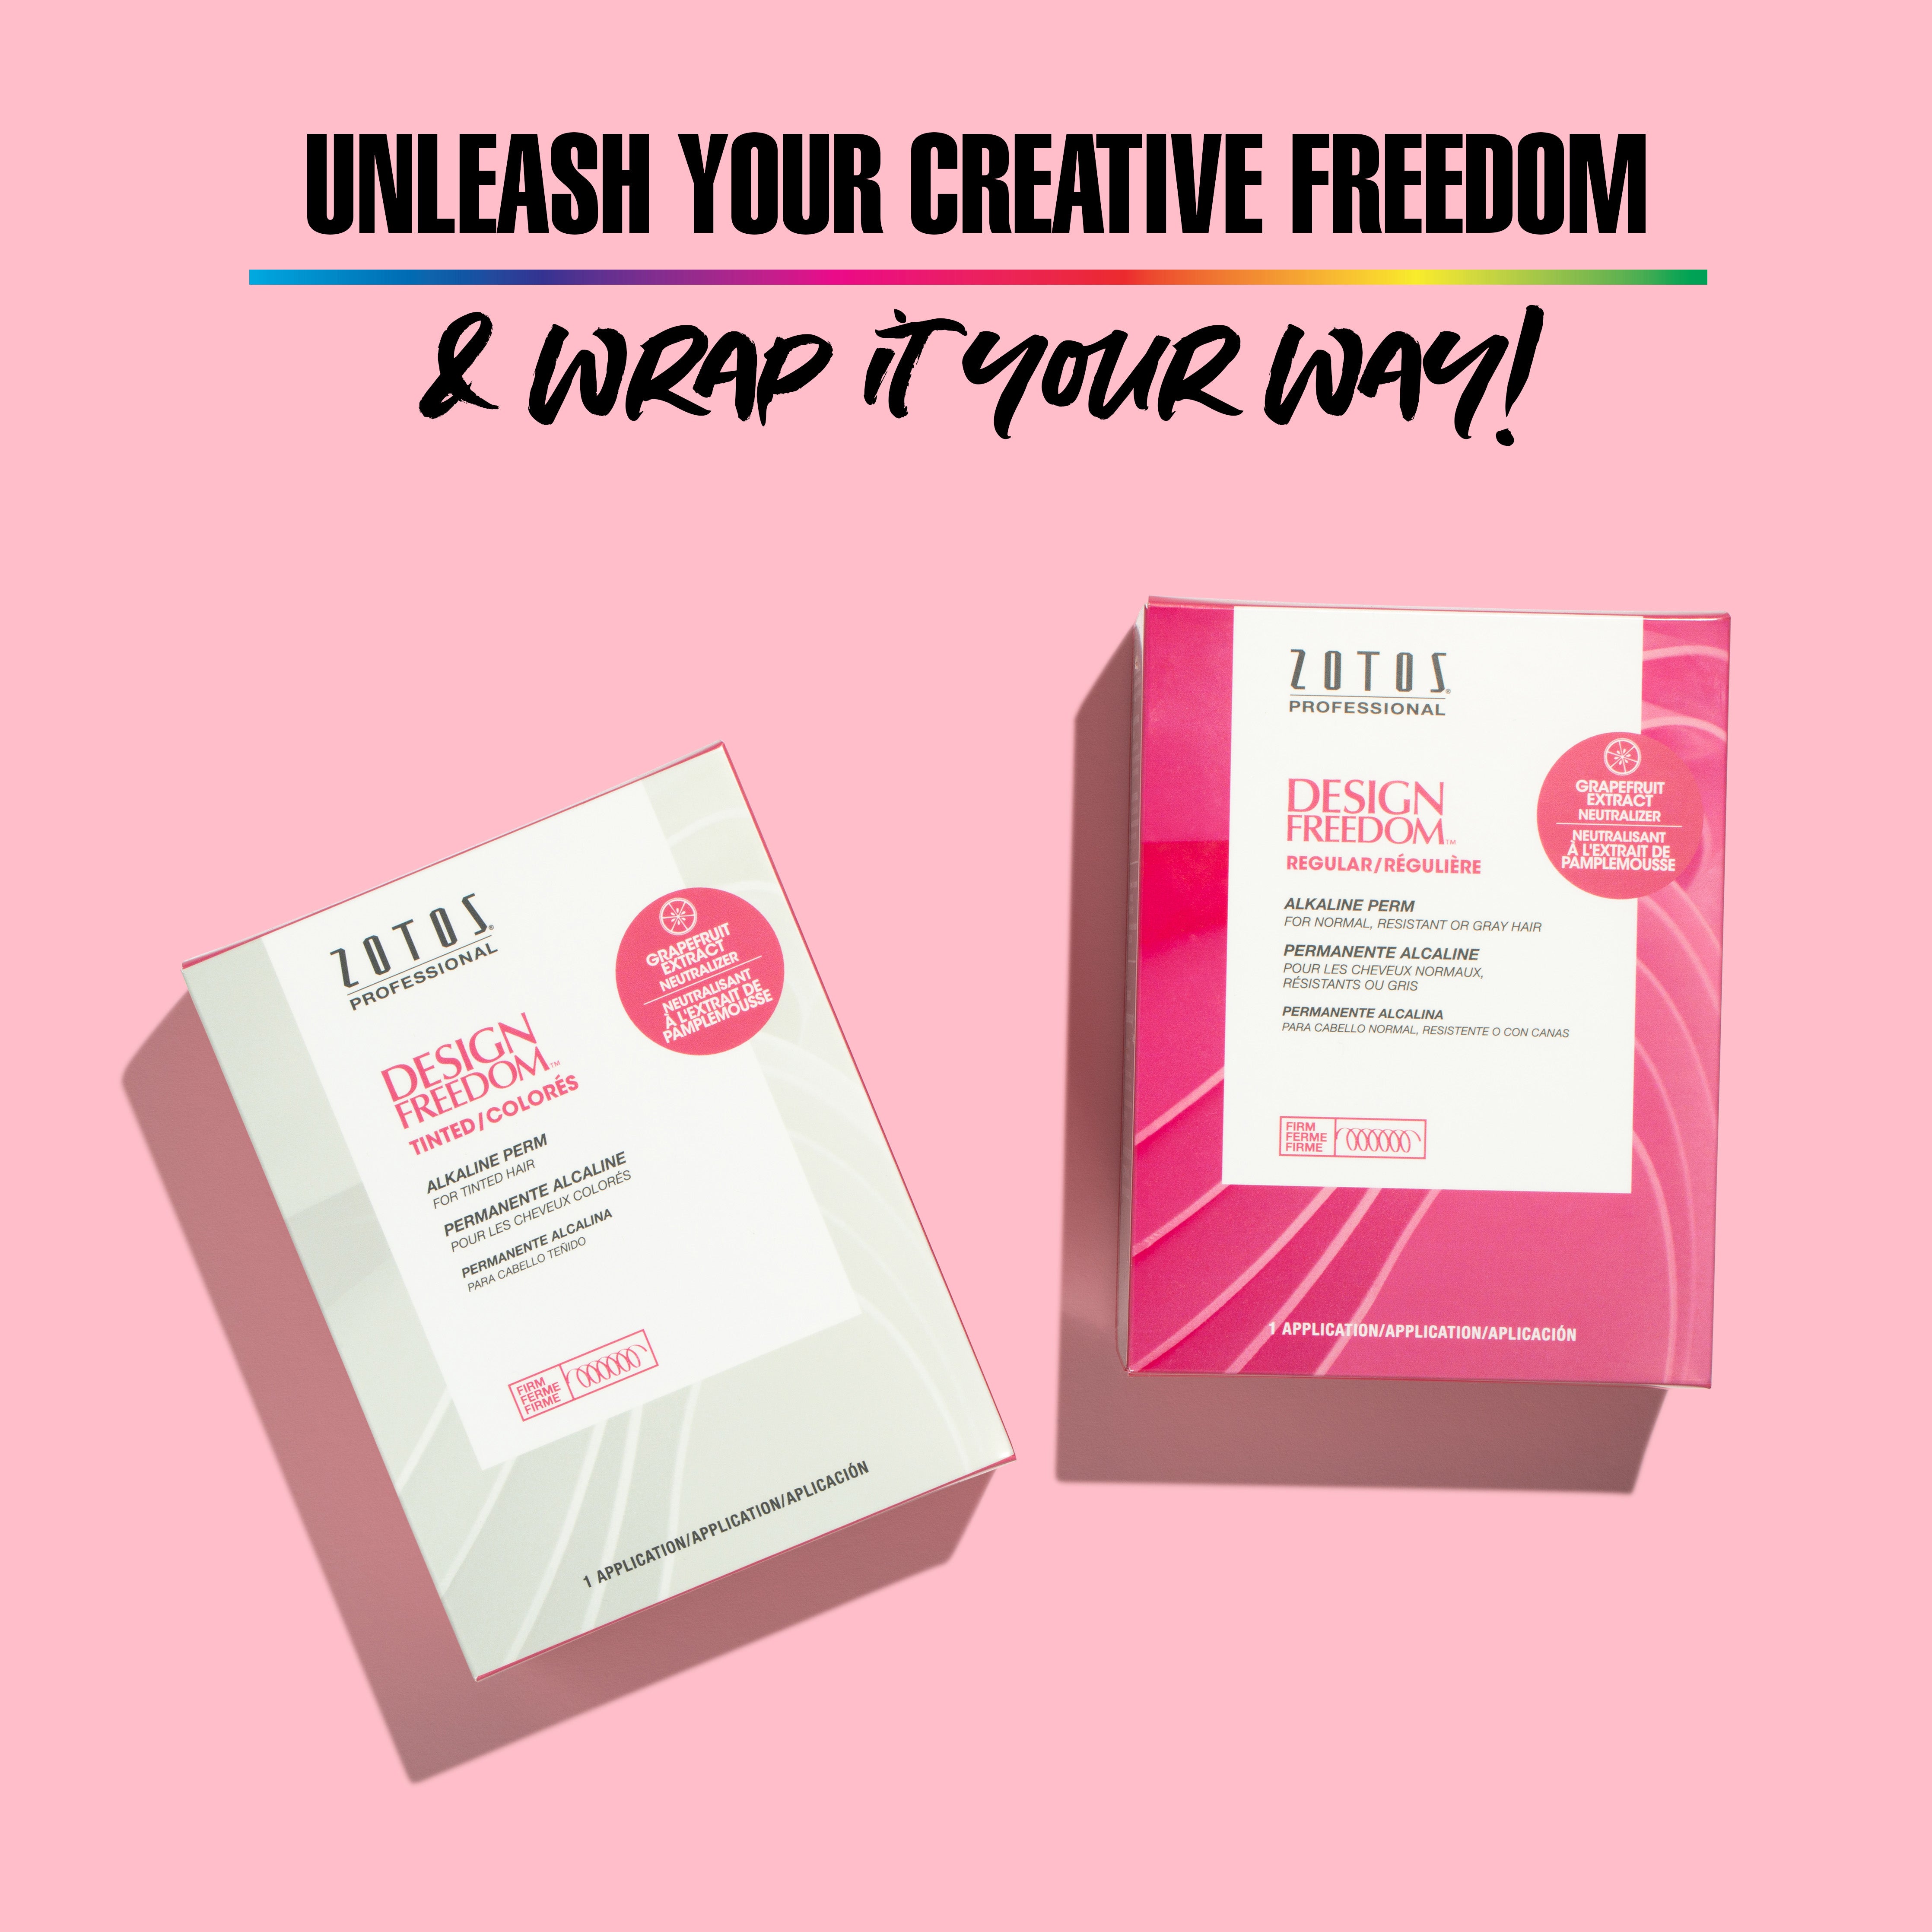 Unleash your creative freedom and wrap it your way!